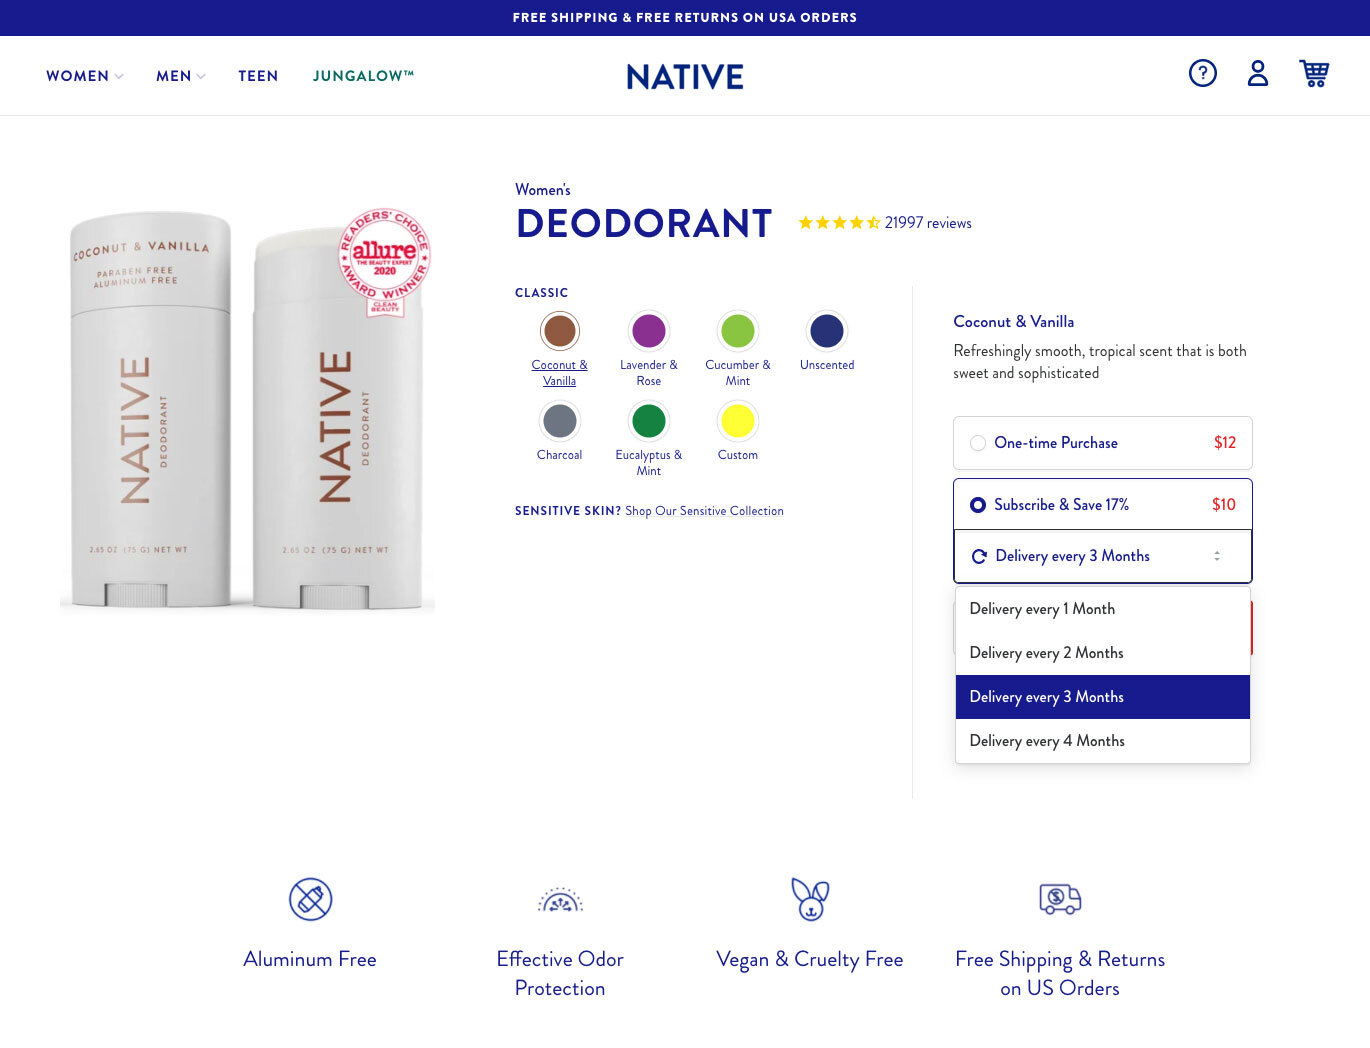 Native customized their customer portal and increased LTV, reduced churn by 15%, and acquired 142% more subscribers